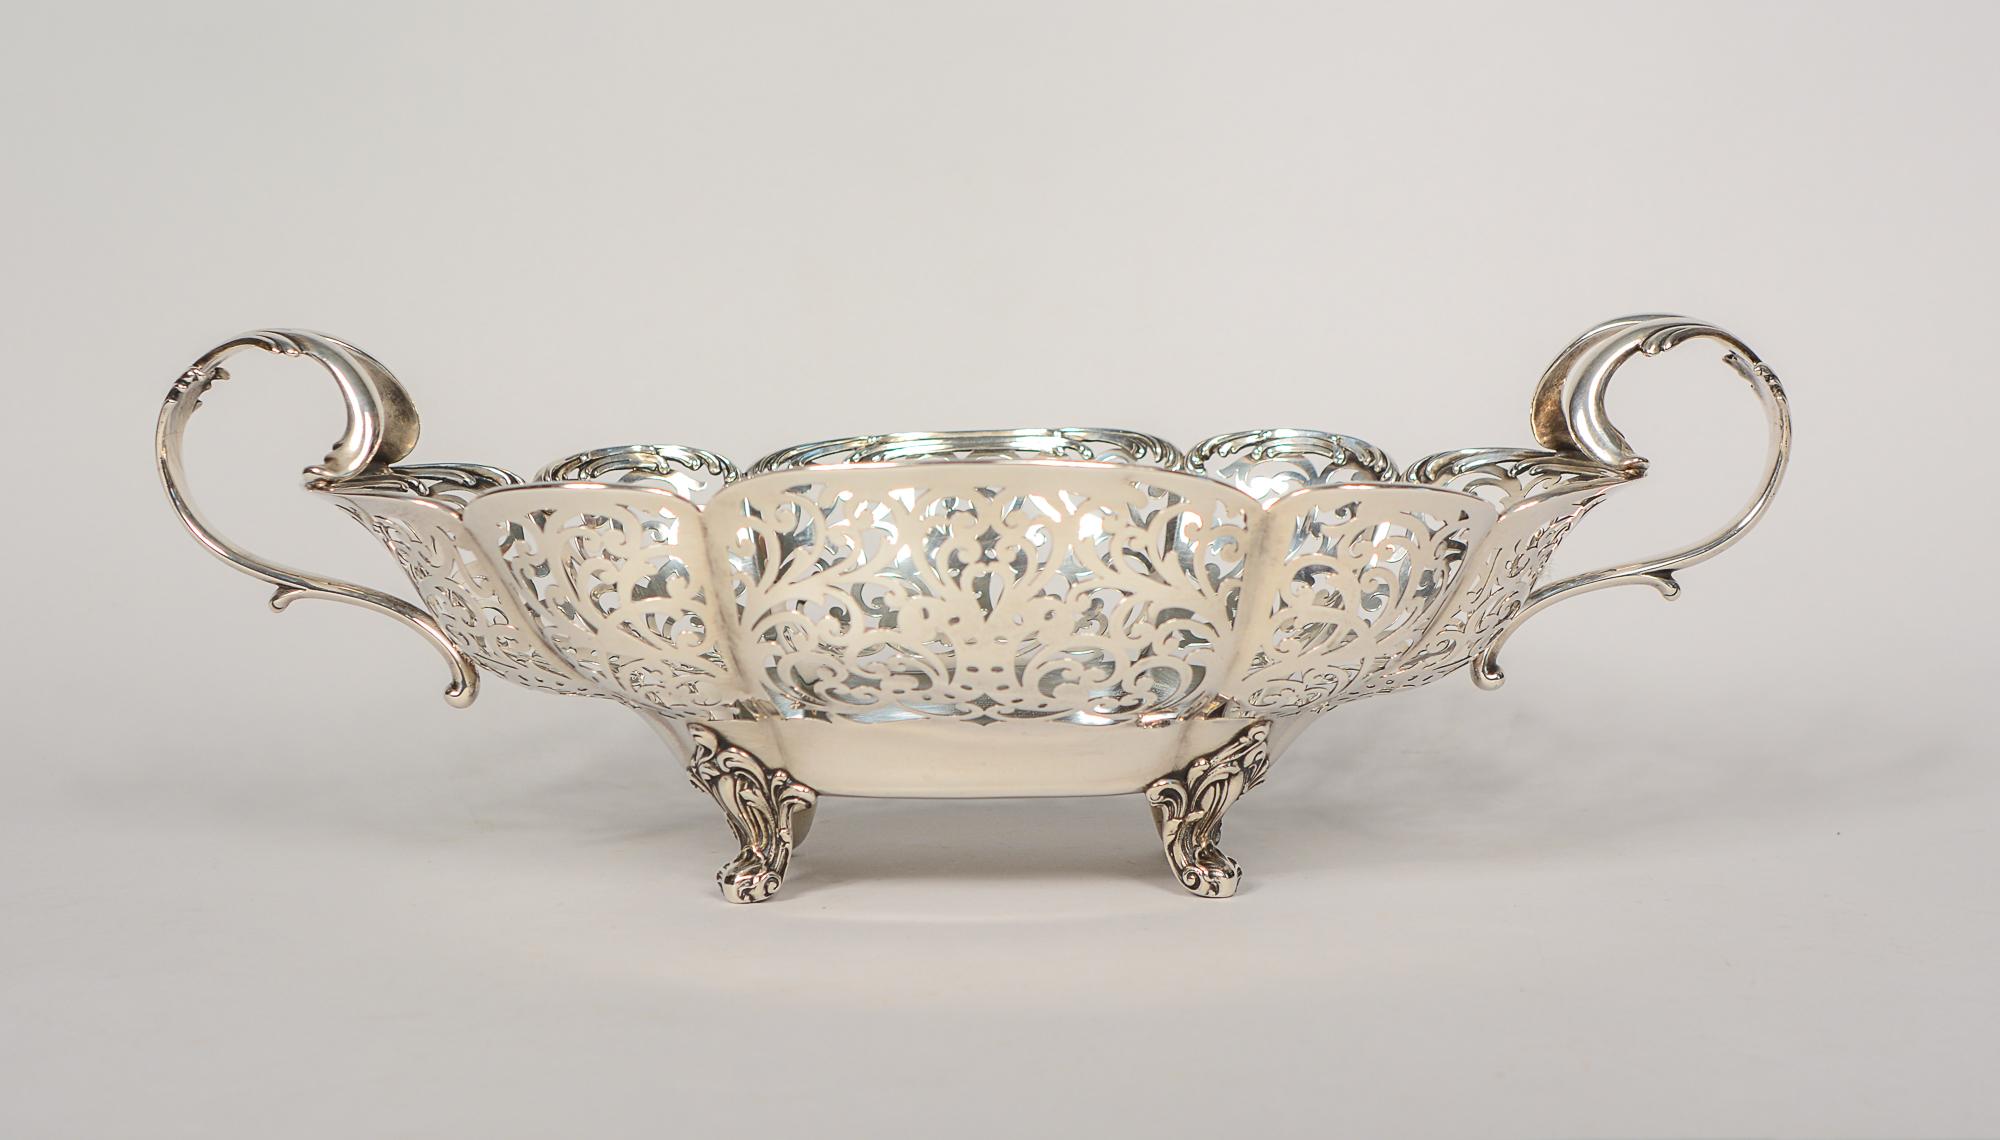 Large open work sterling bowl or basket by Providence, R. I. maker Howard Sterling Company. The Howard Sterling co. was in existence from 1878 to 1902. The company was known for exceptional work and this piece is an excellent example. This weighs